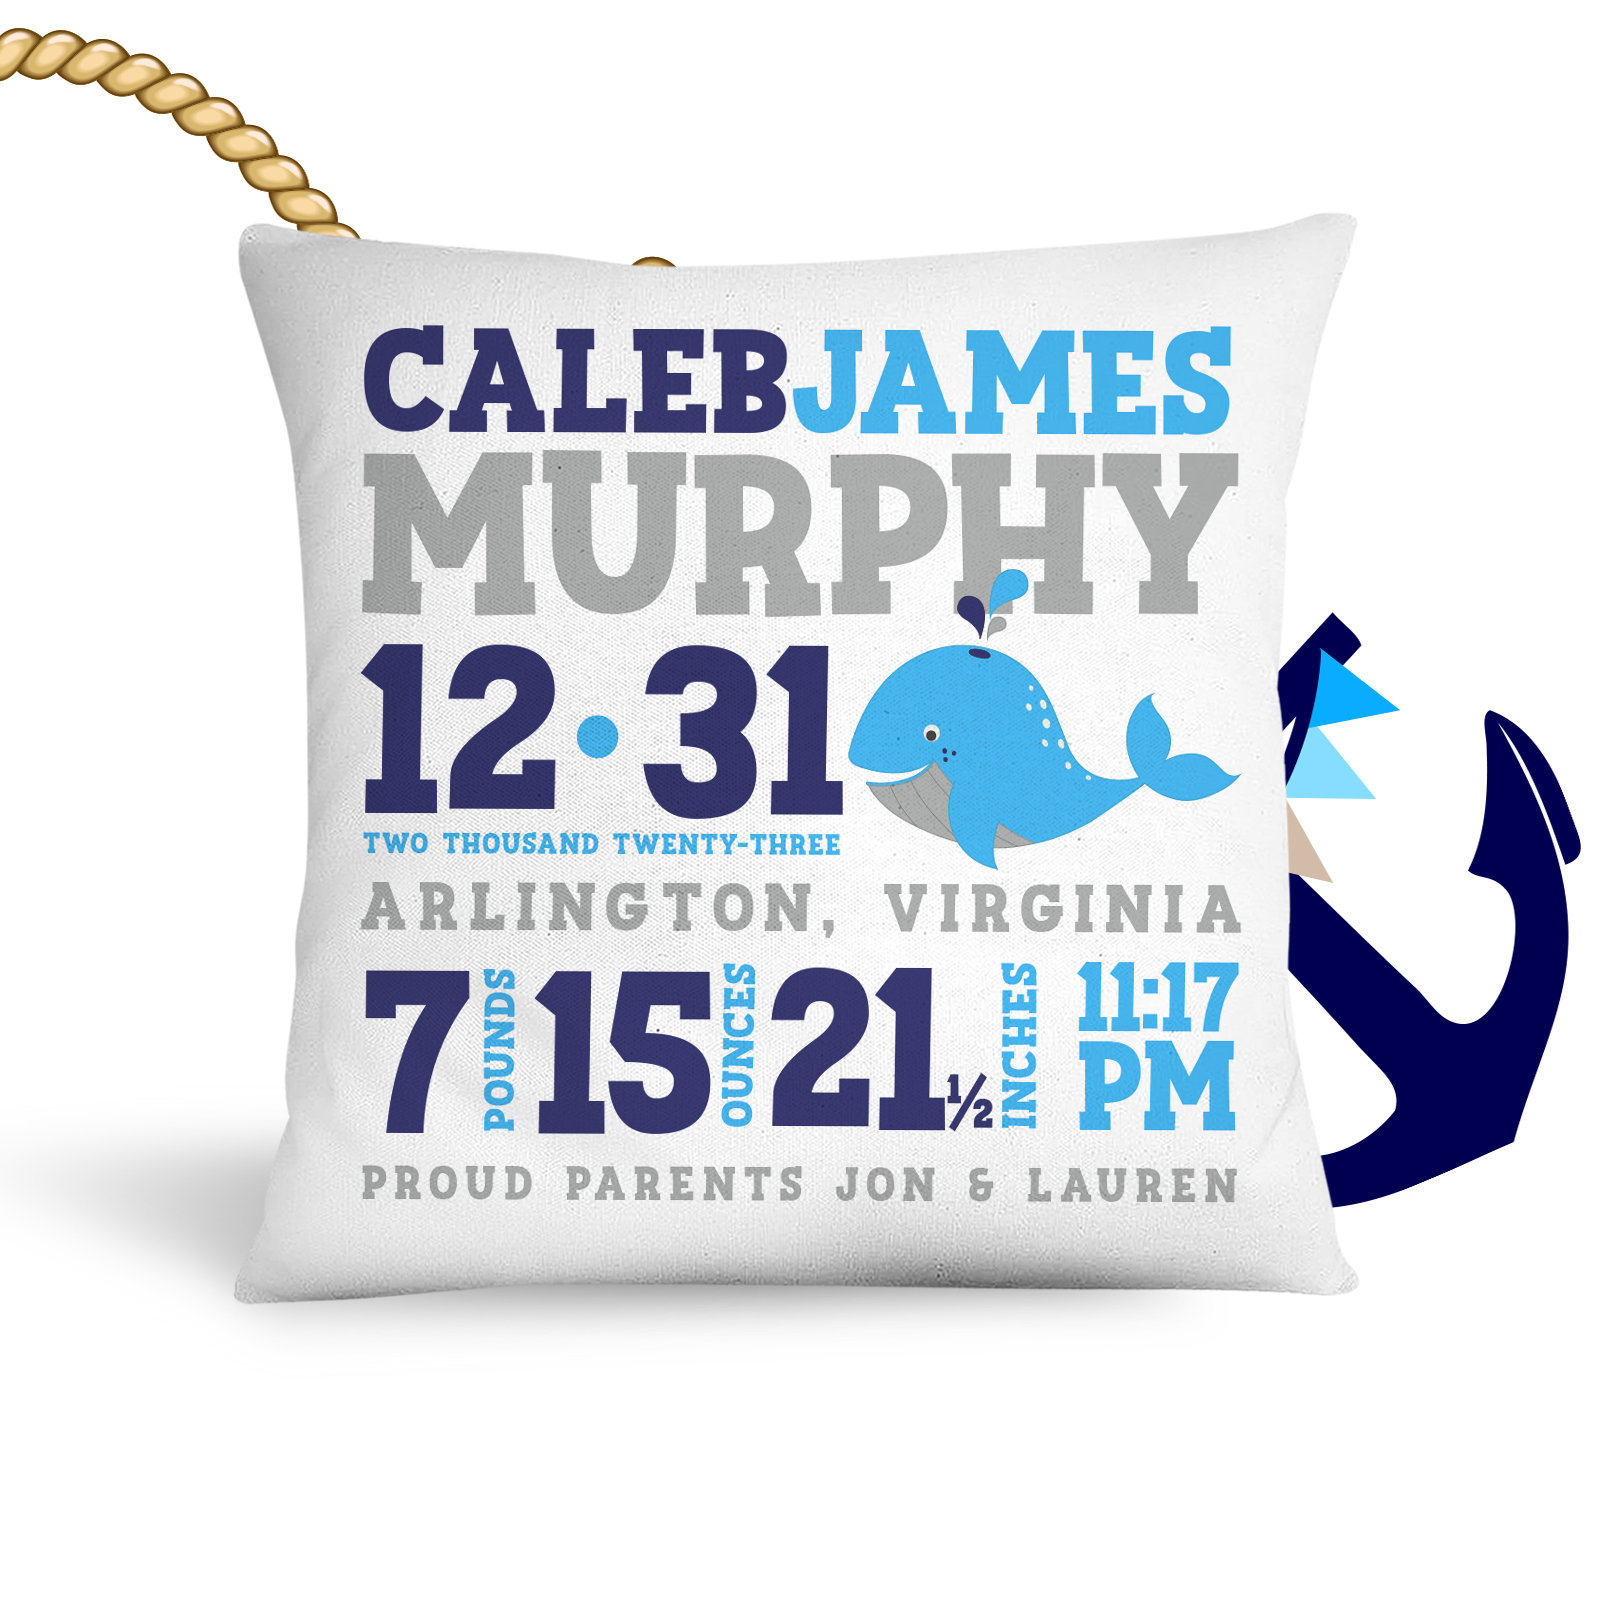 Personalised Cushion Pillow Case Cover Baby Birth Name Date Weight Boy Gift